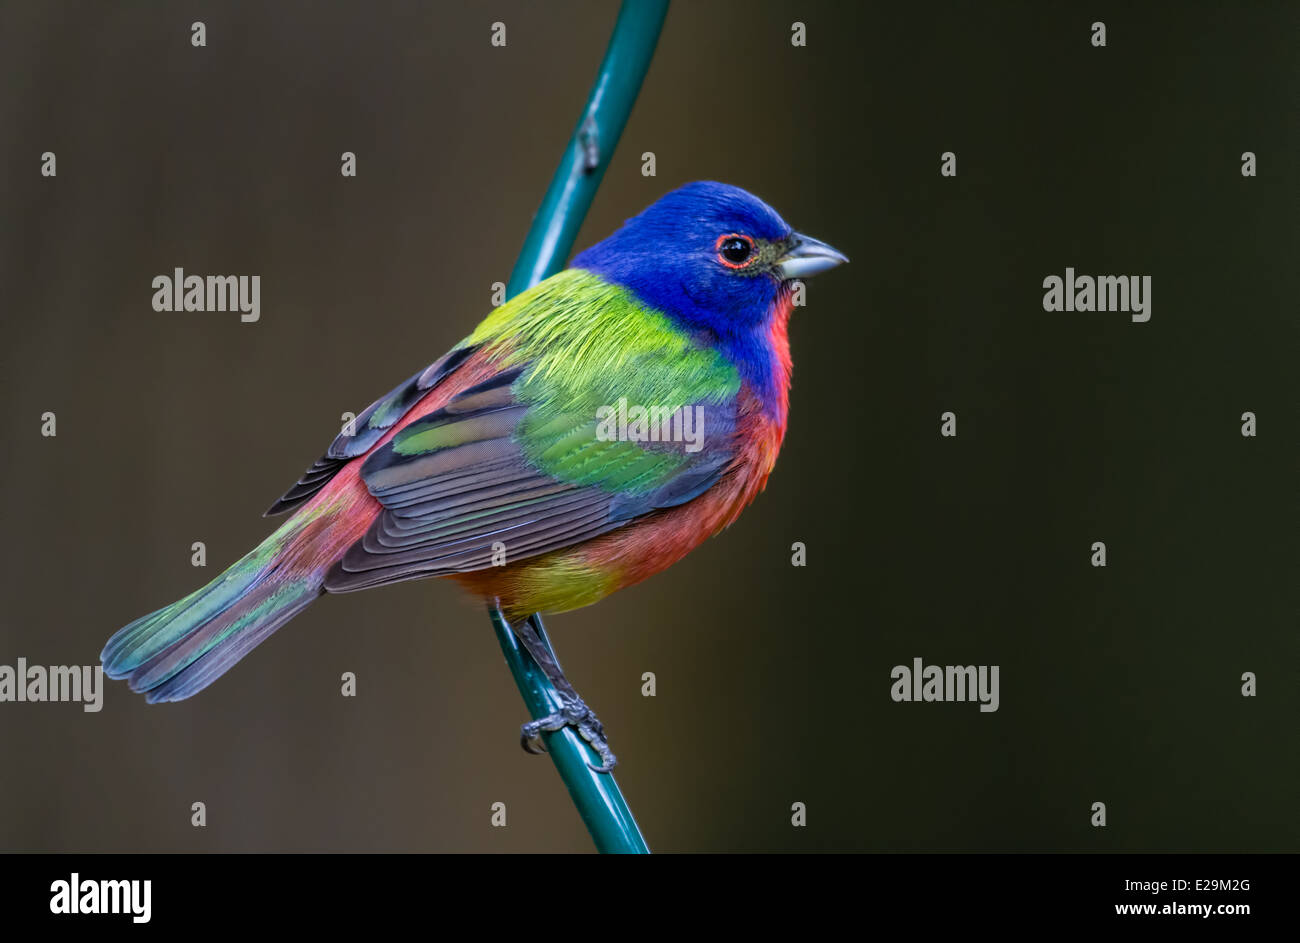 Male Painted Bunting (Passerina ciris) perched on a metal pole. Stock Photo